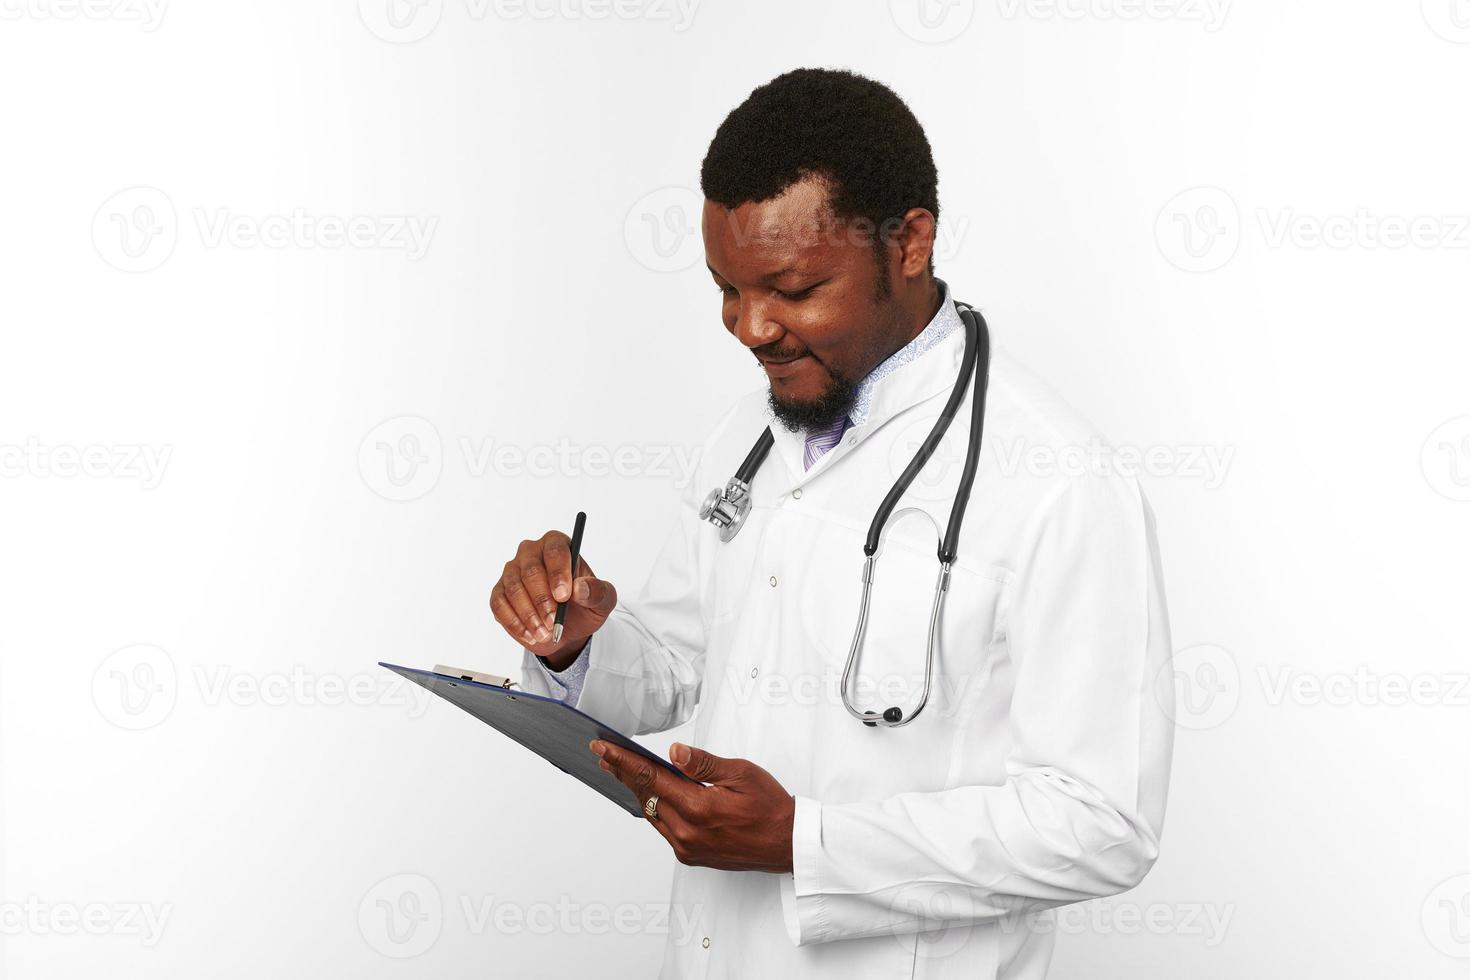 Black bearded doctor man in white coat with stethoscope filling medical records on clipboard photo